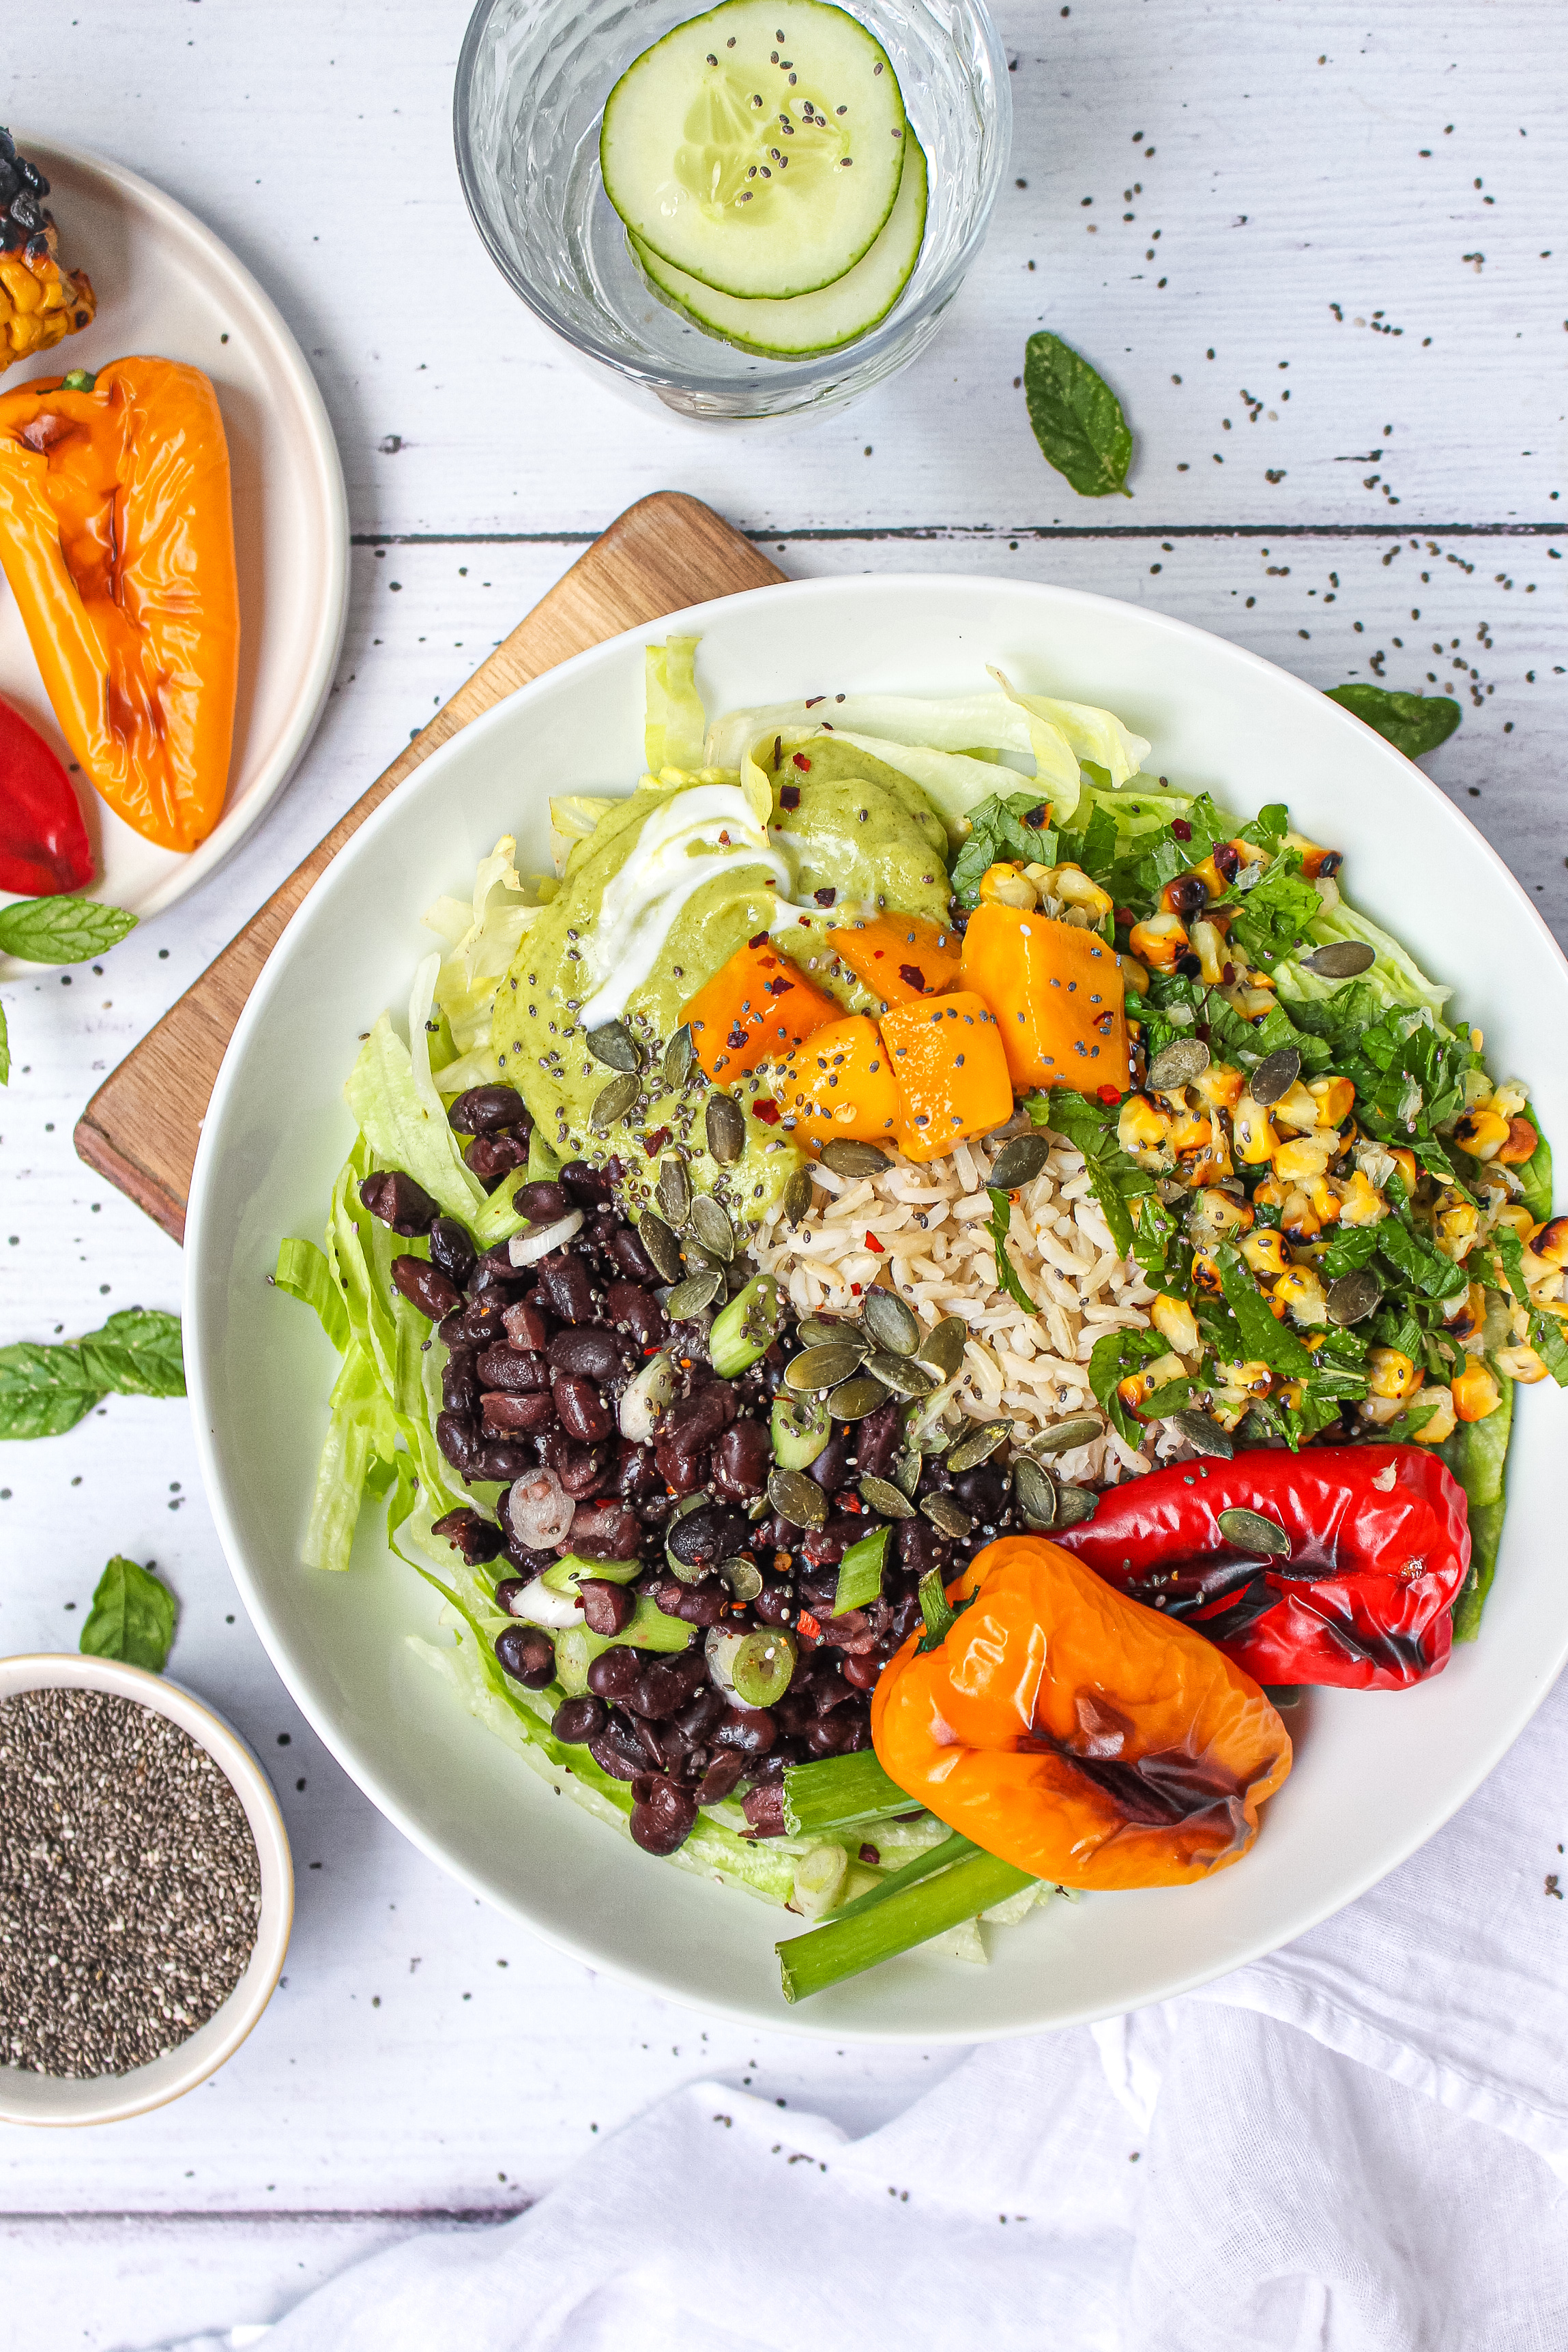 Charred Red Pepper Corn and Black Bean Bowl with Avocado Crème